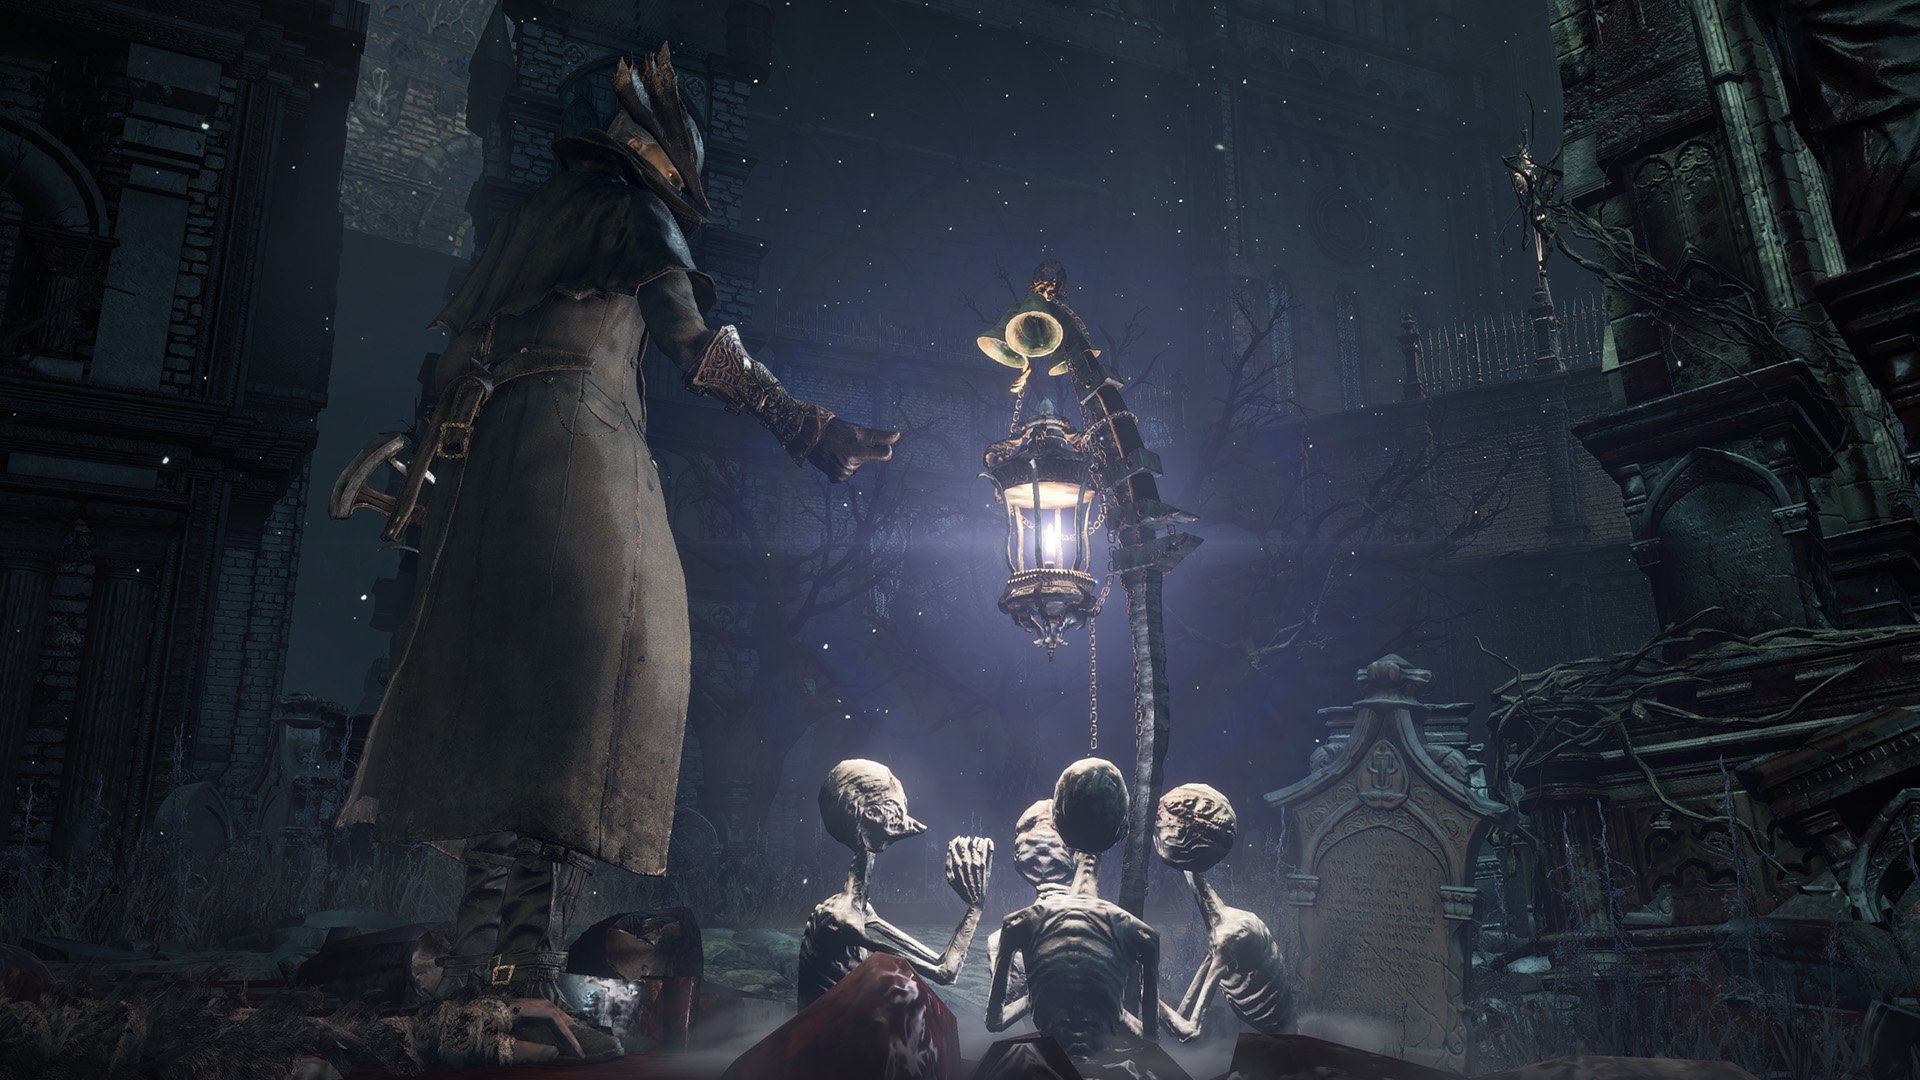 Video Game 'Bloodborne' Forges Connections During Quarantine : NPR